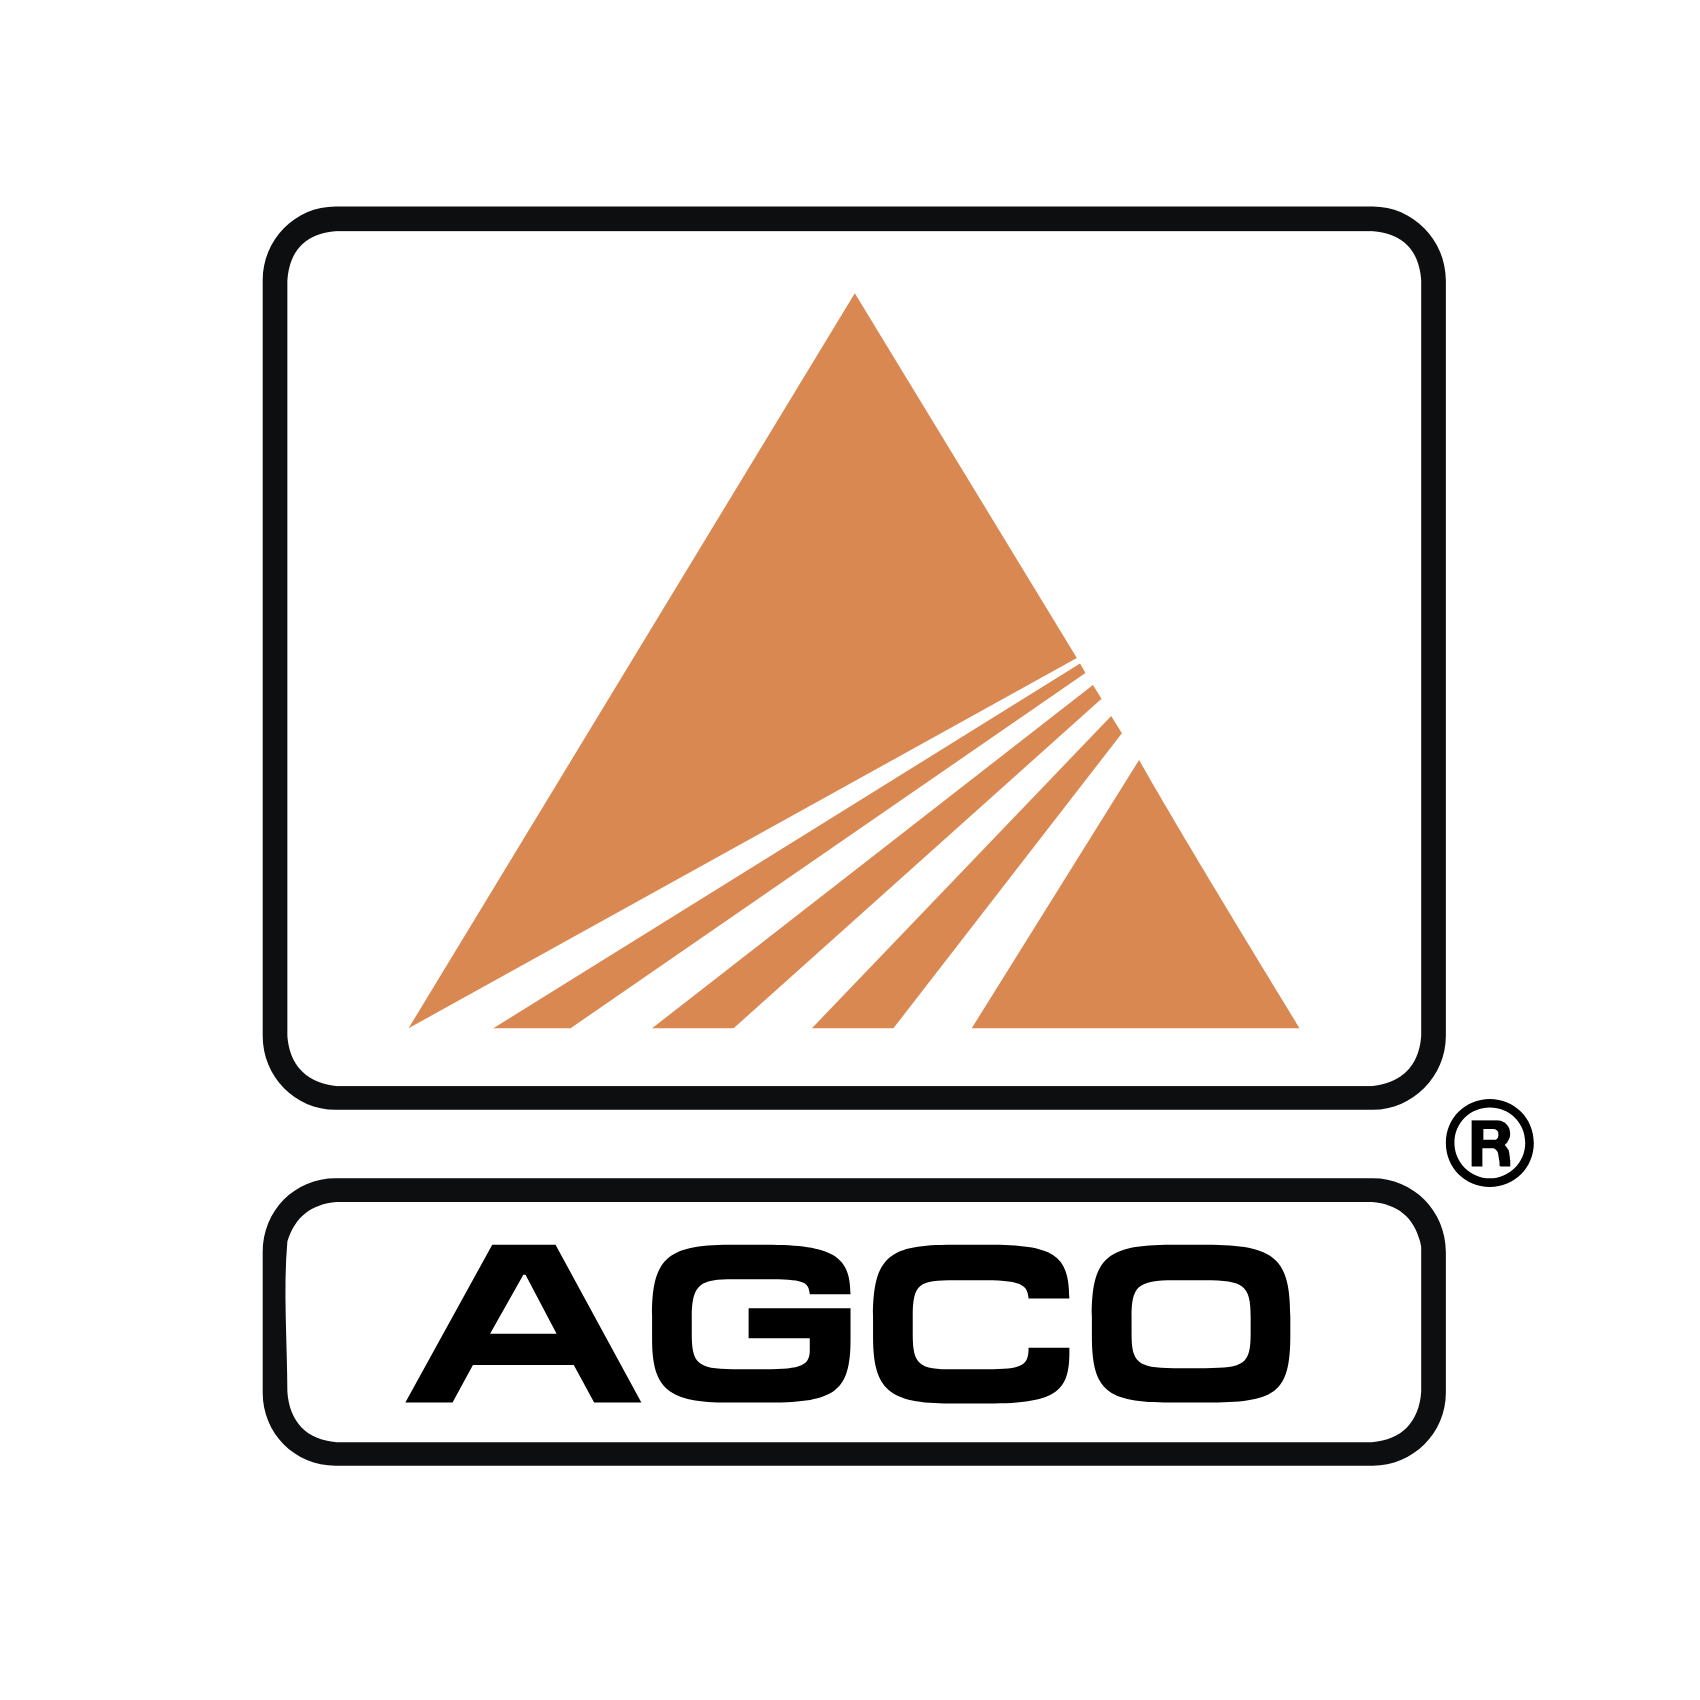 Download Agco Logo PNG and Vector (PDF, SVG, Ai, EPS) Free